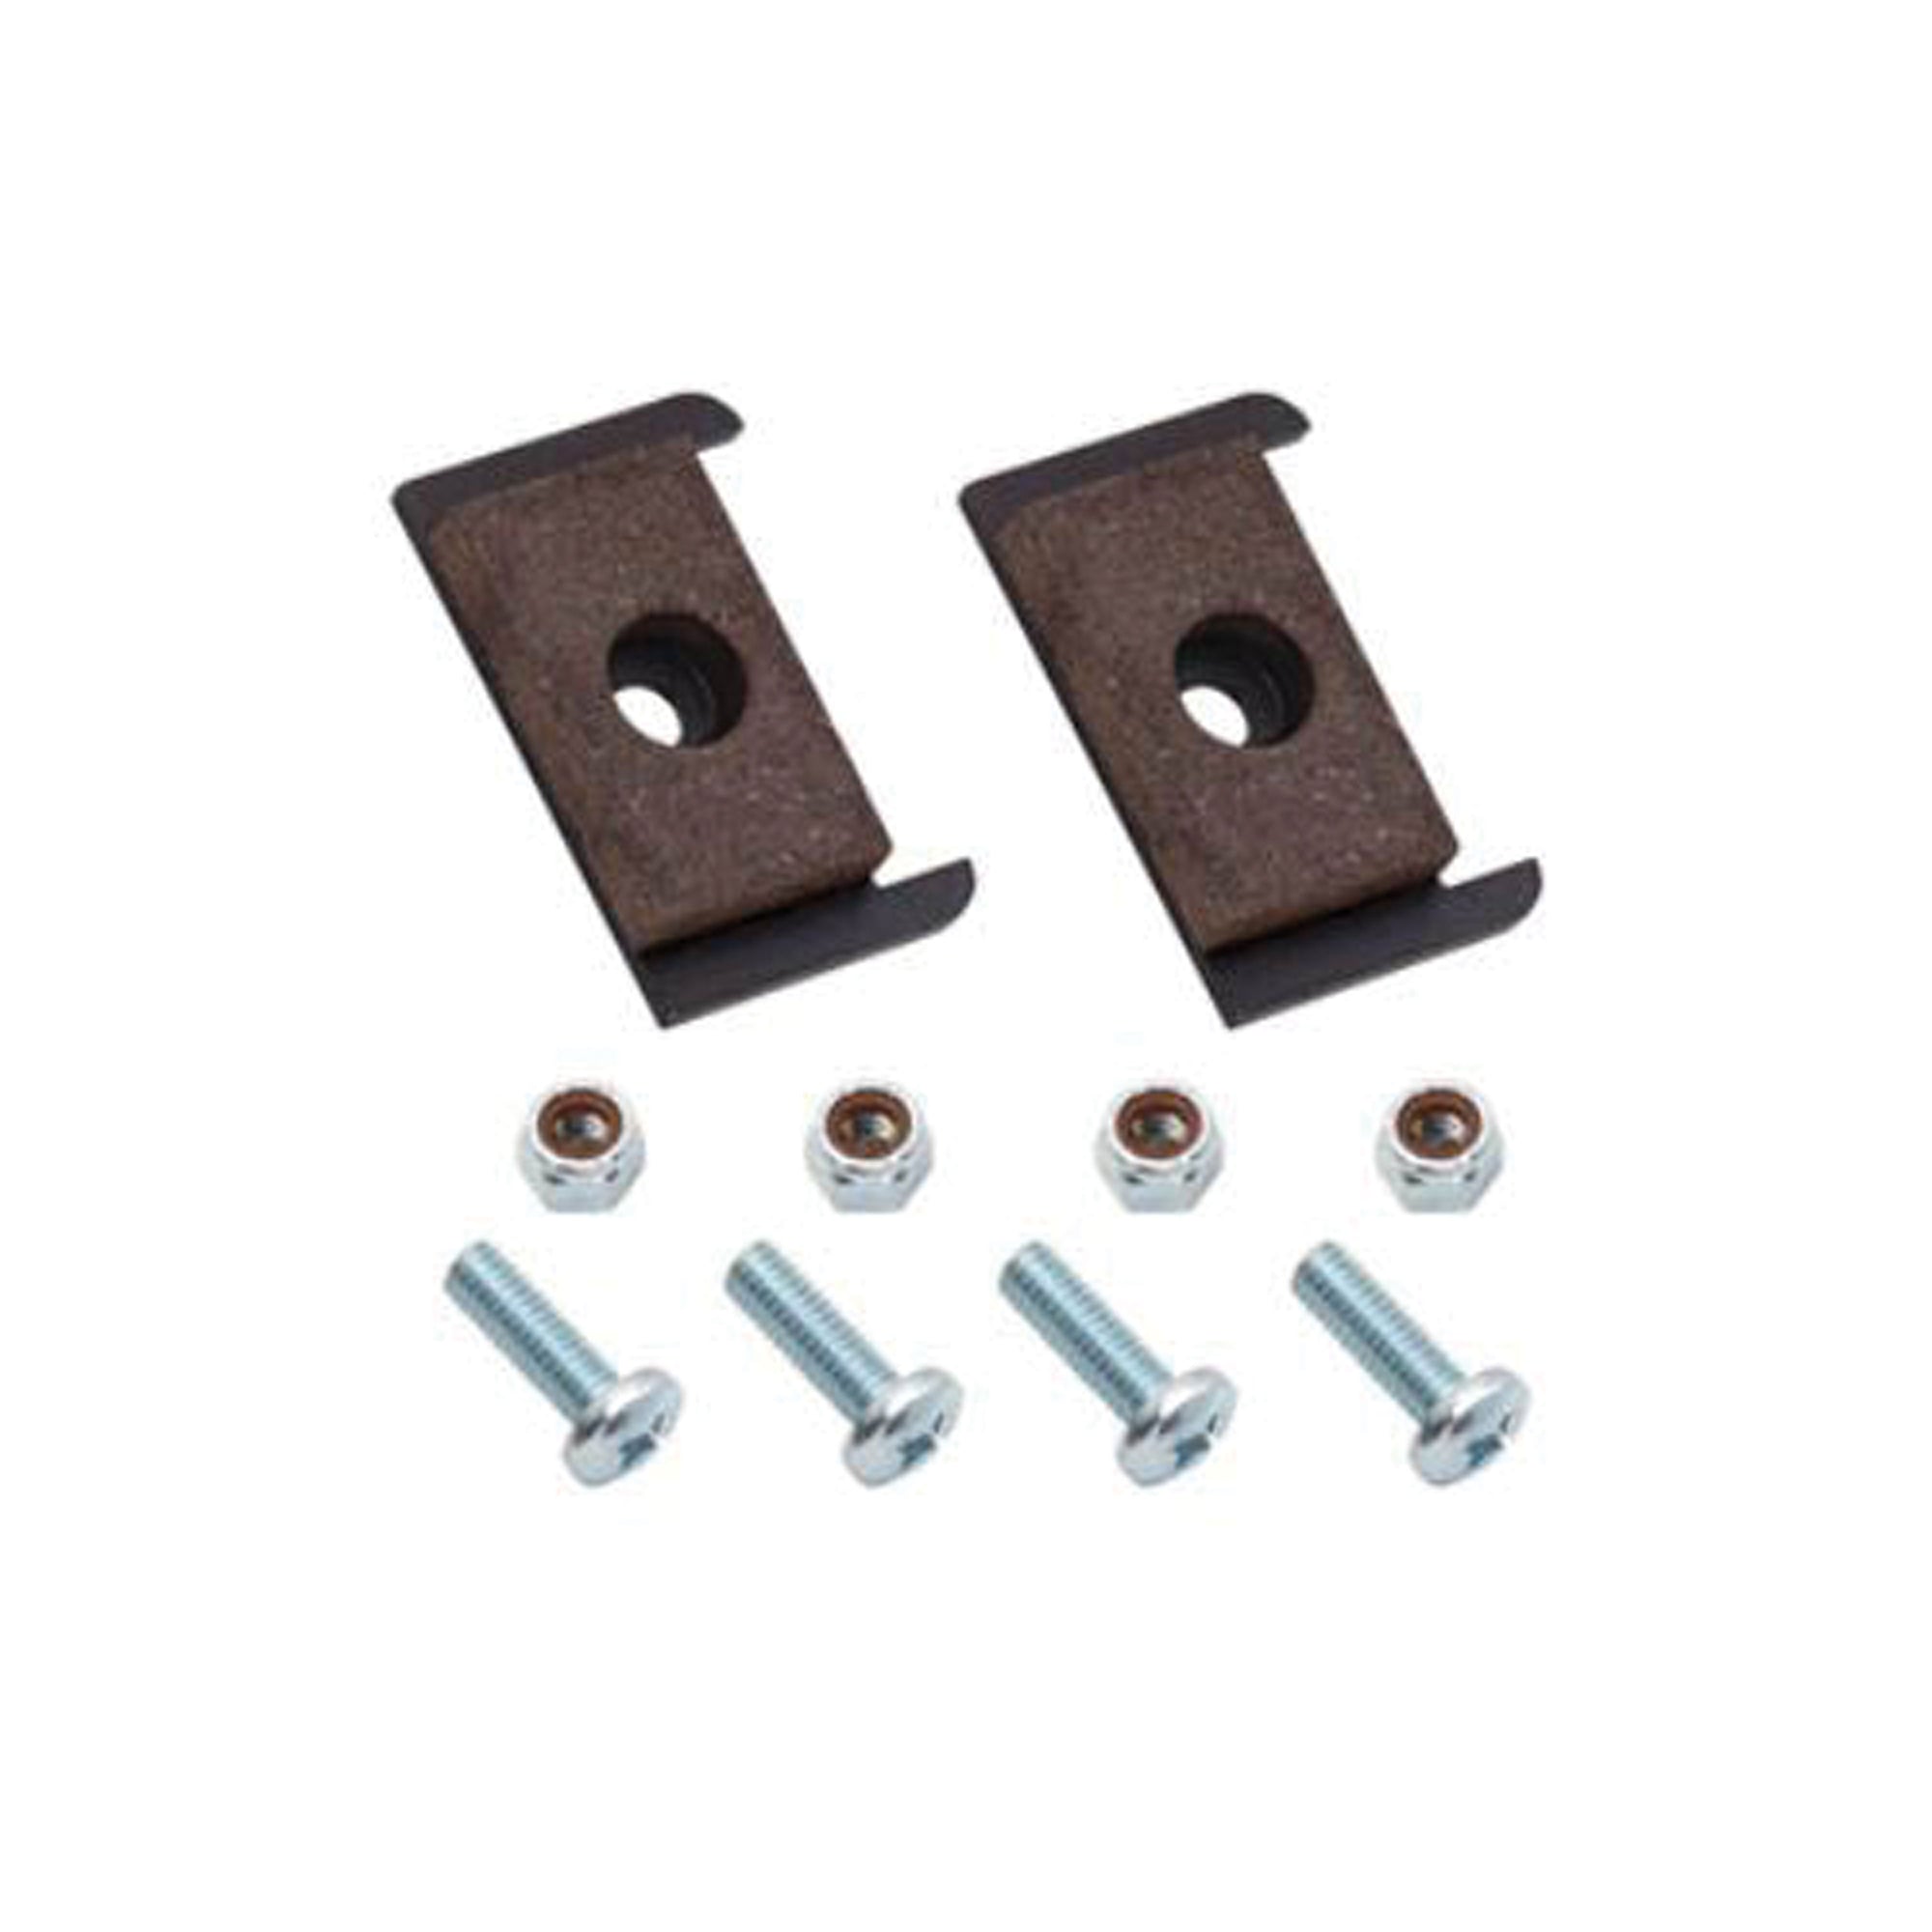 Reese 58497 Friction Pad Kit for Light Weight Distribution Kit #66557 and #66558